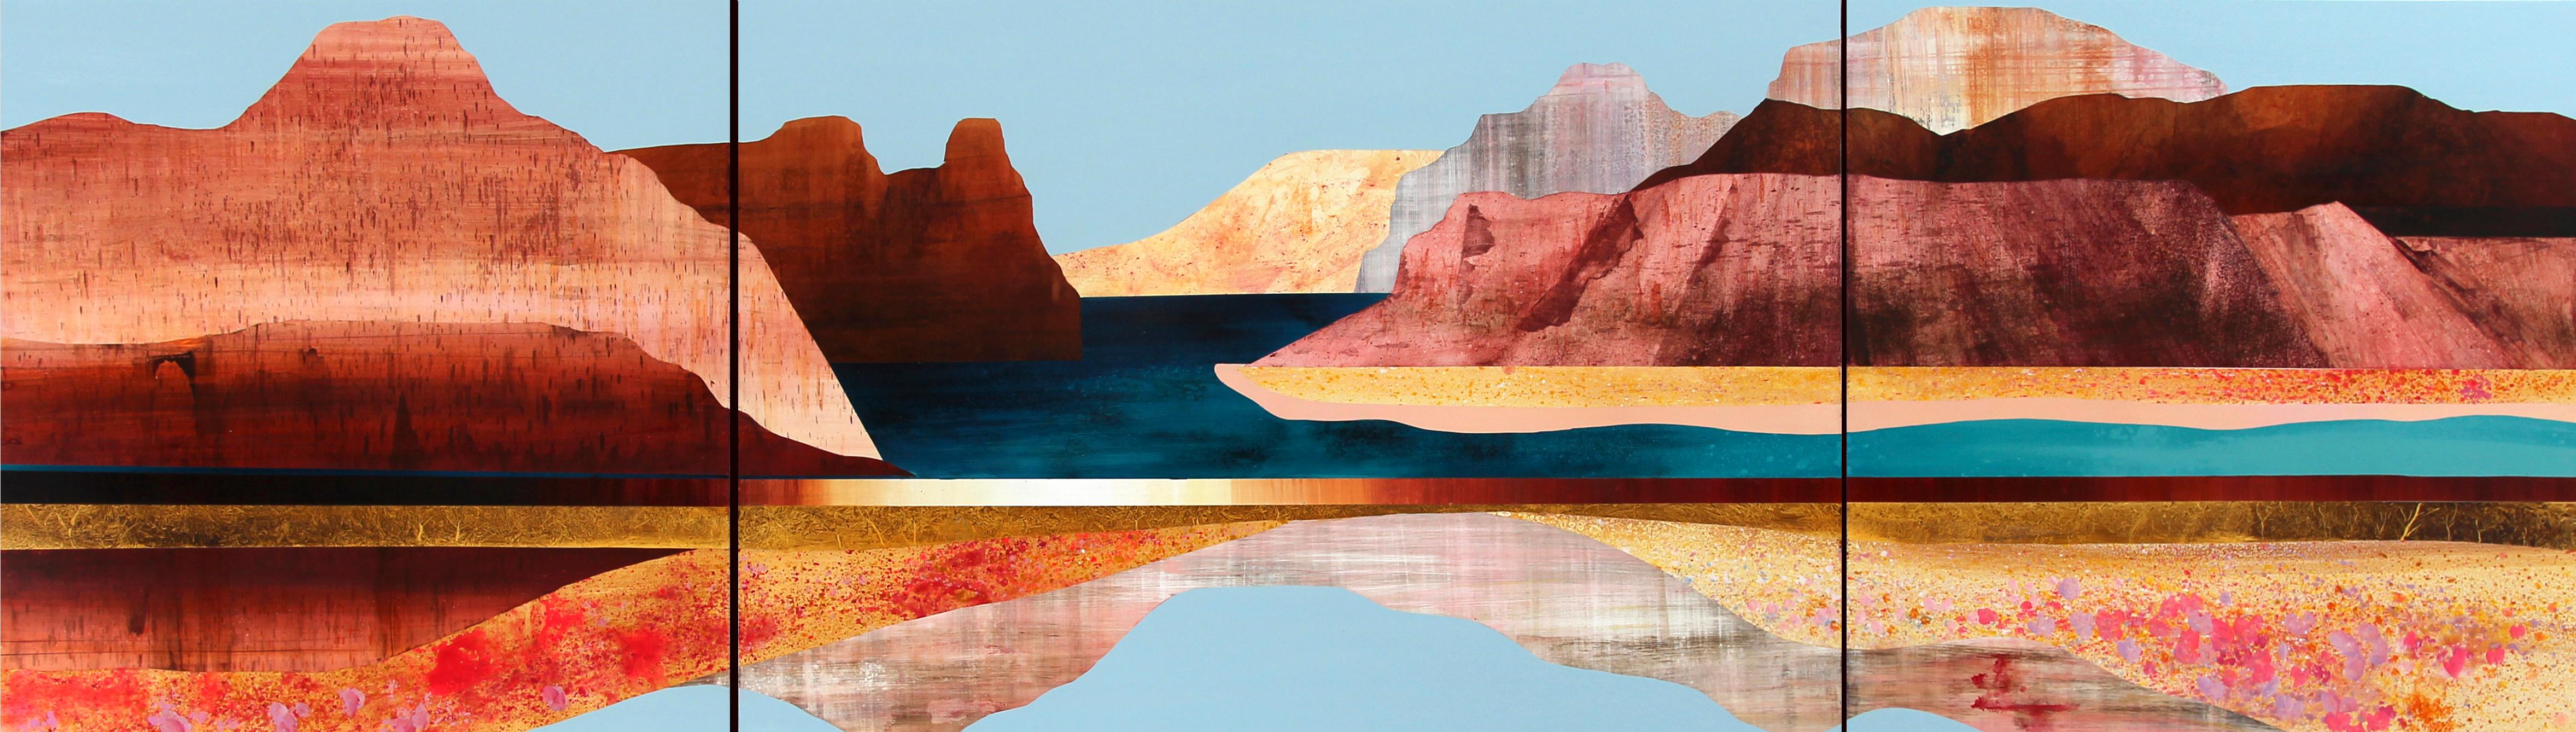 Sarah Winkler Abstract Painting - Colorado River into the Grand Canyon